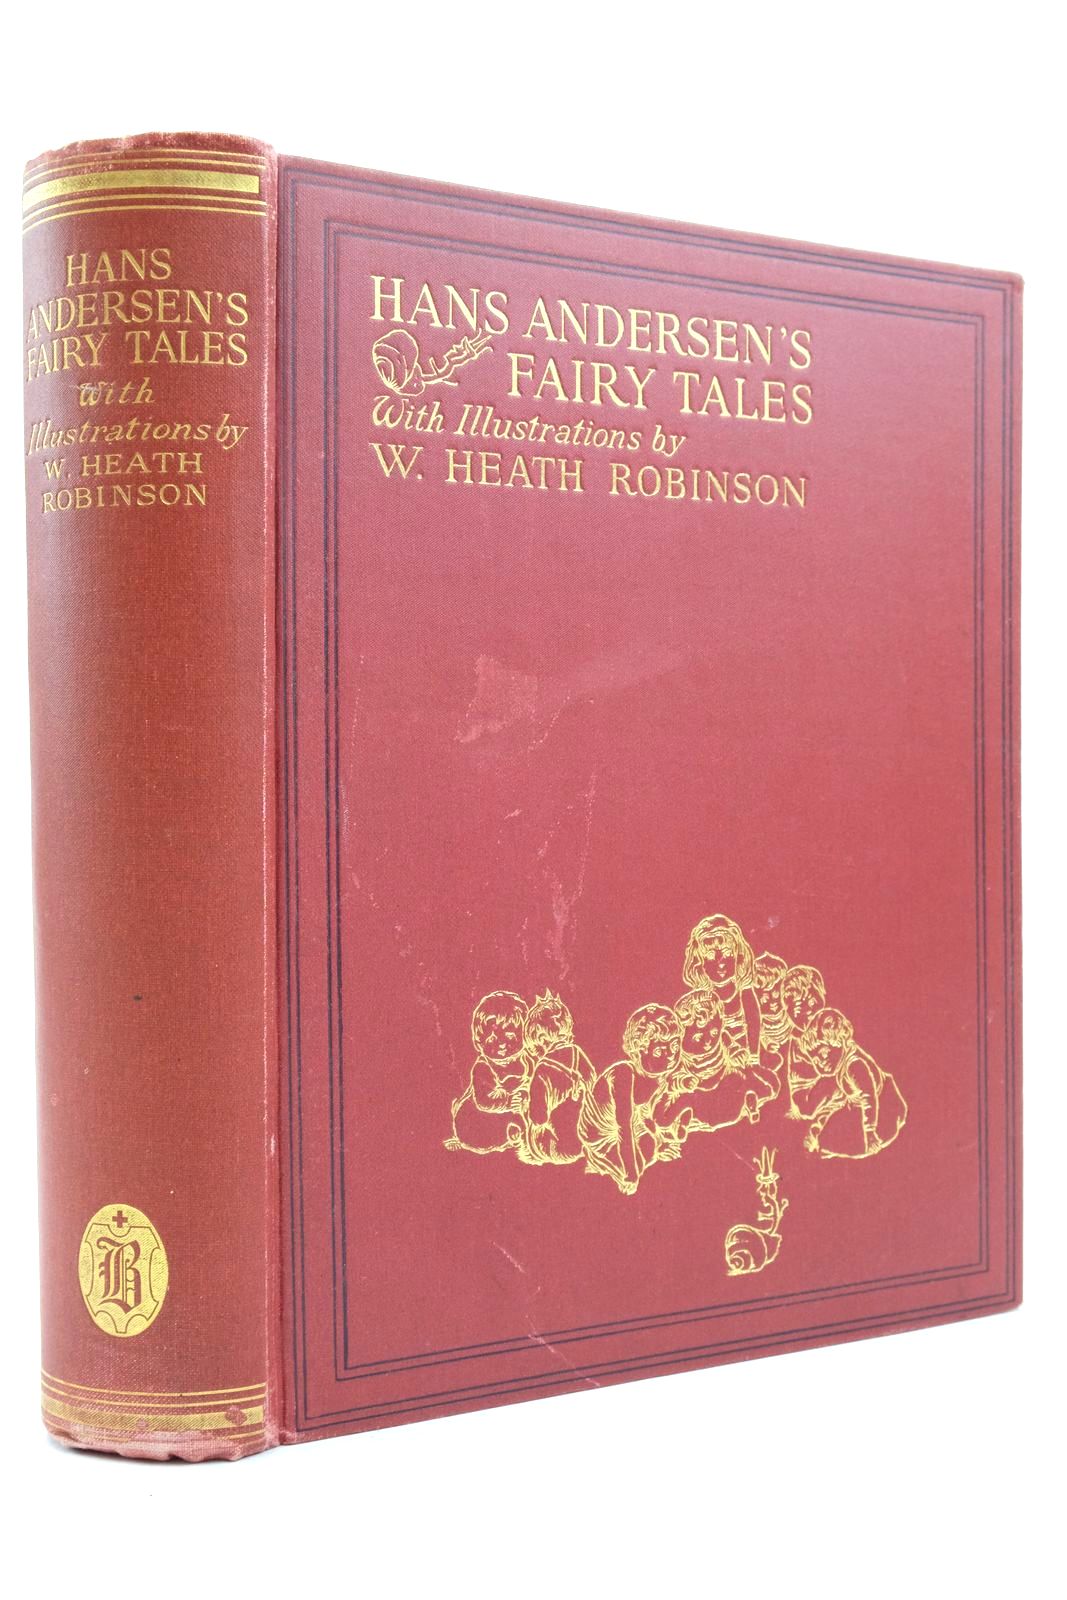 Photo of HANS ANDERSEN'S FAIRY TALES written by Andersen, Hans Christian illustrated by Robinson, W. Heath published by Hodder &amp; Stoughton, Boots the Chemists (STOCK CODE: 2138936)  for sale by Stella & Rose's Books